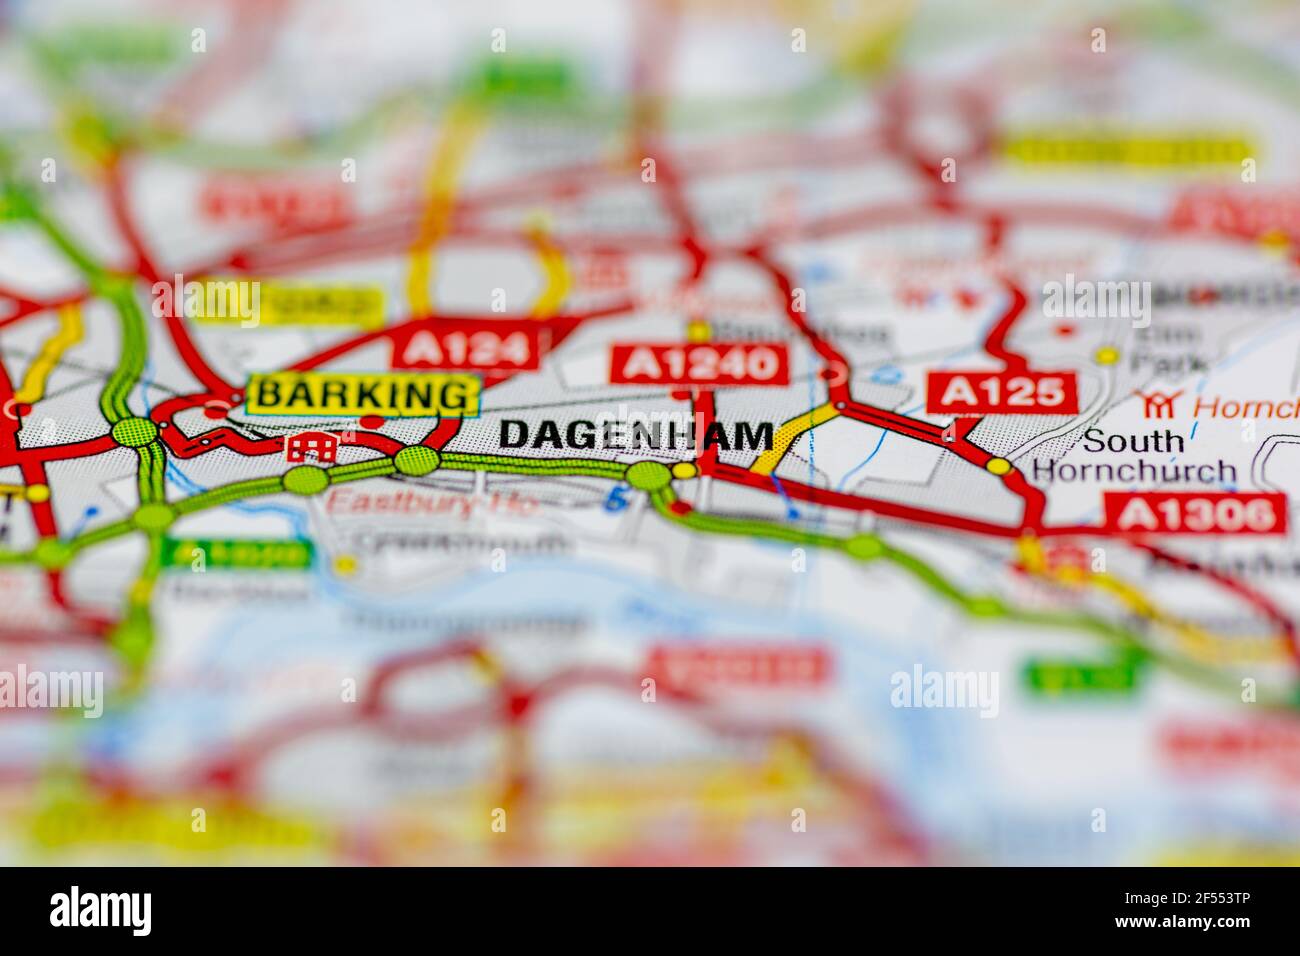 Dagenham Shown on a Geography map or road map Stock Photo